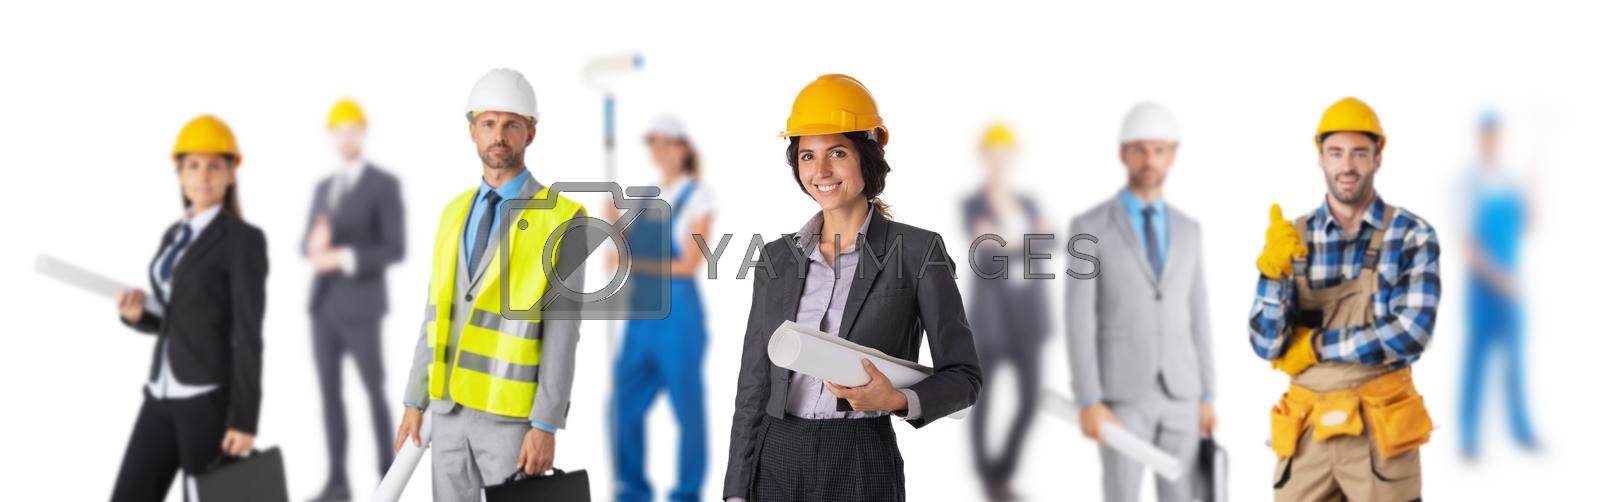 Royalty free image of Industrial construction workers by ALotOfPeople